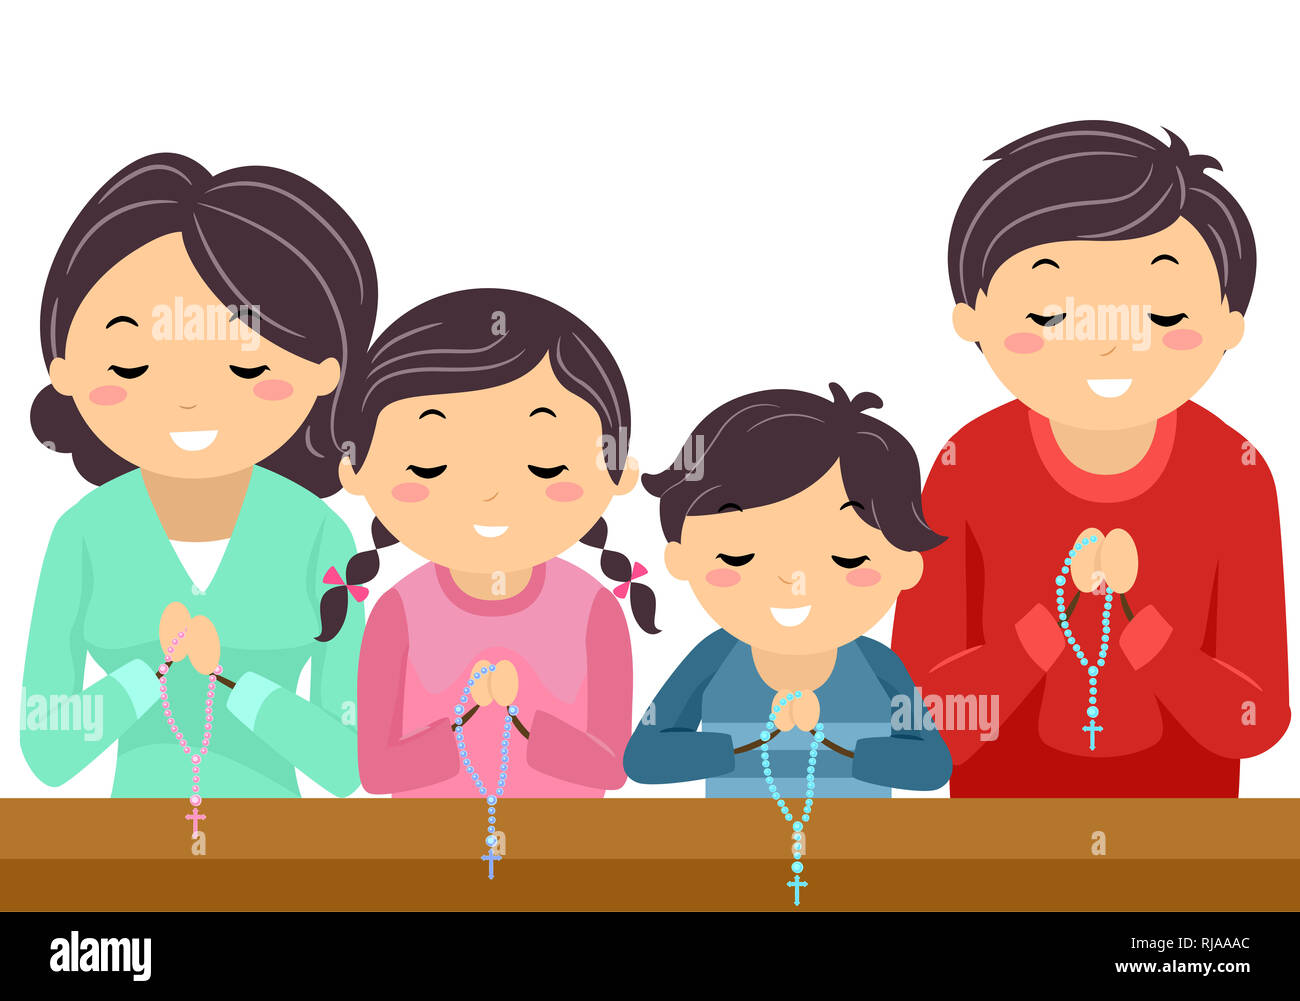 Illustration of Stickman Family Praying the Rosary Inside the Church Stock Photo